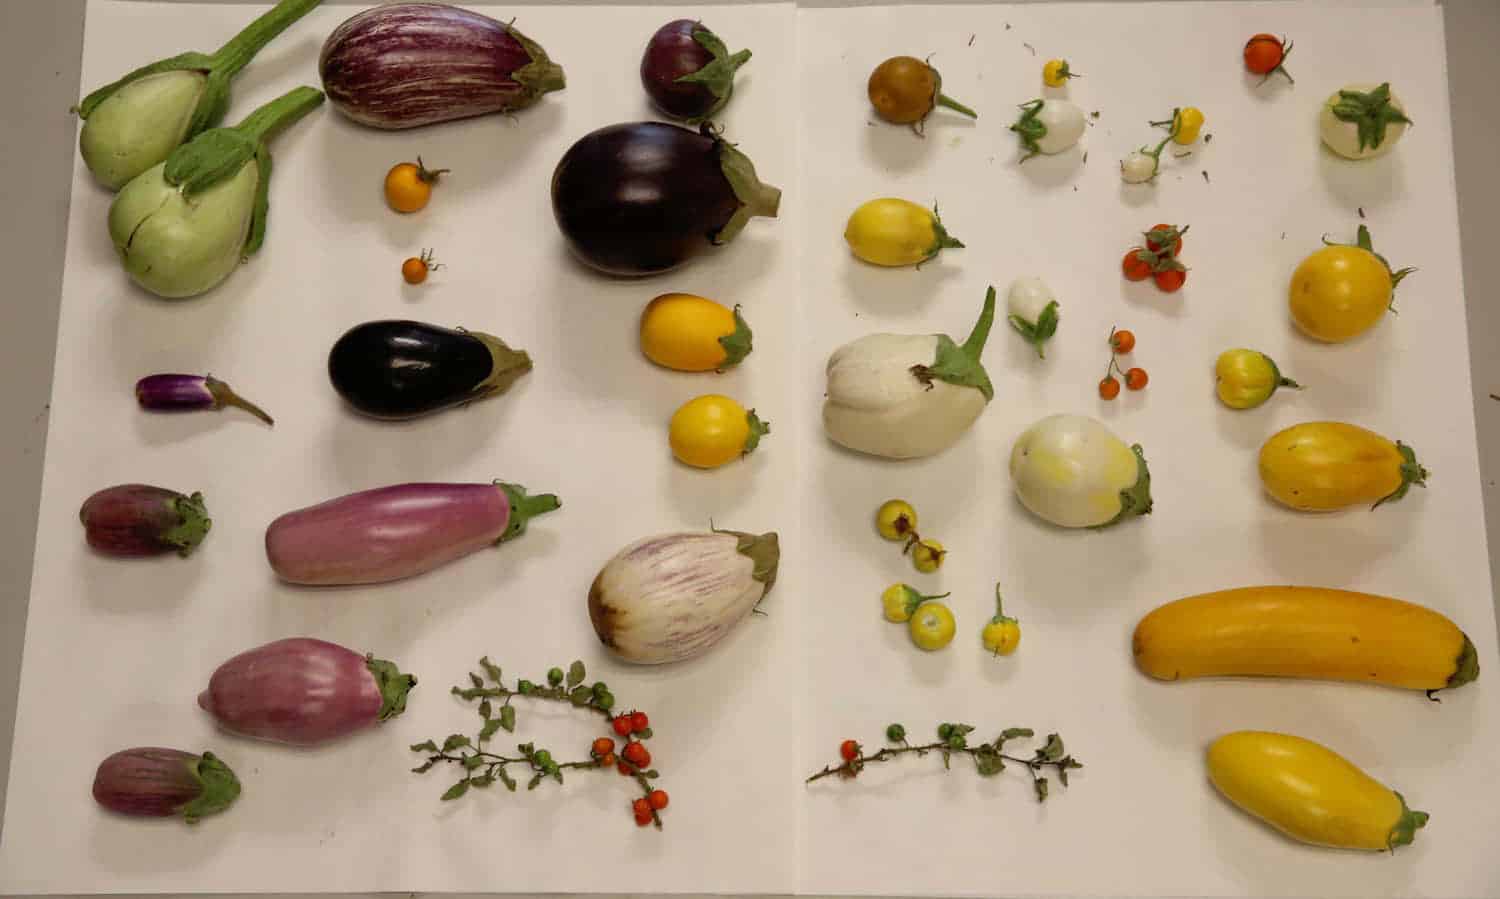 This summer, farmers joined the hunt for genetic sources of climate resilience: and with their help, potato, eggplant, and alfalfa will endure into the future.